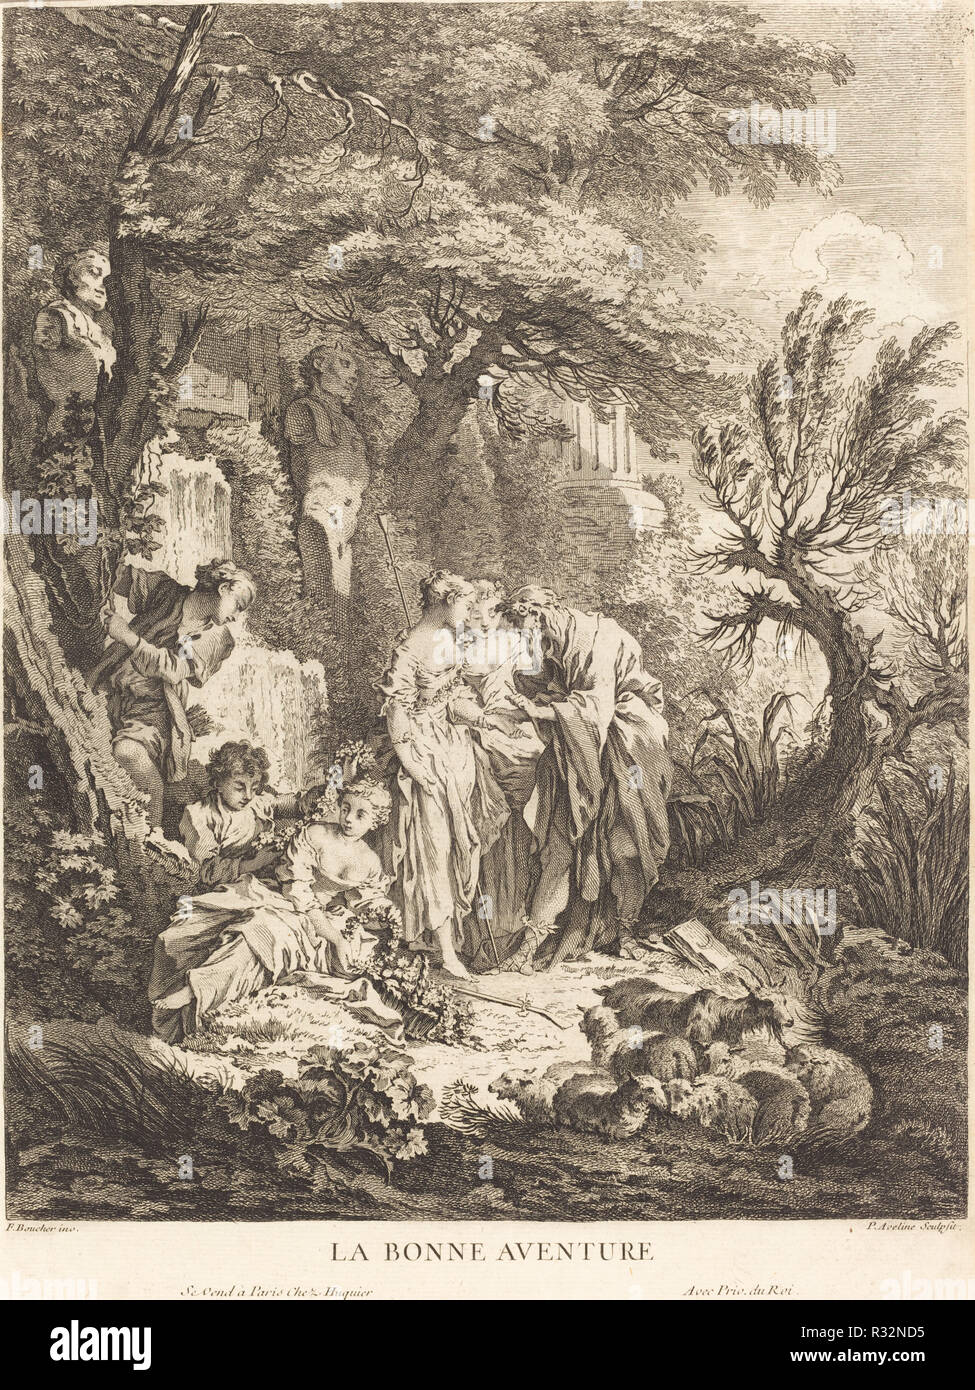 La Bonne Aventure. Dated: 1738. Dimensions: plate (cut within platemark at right): 40.3 x 30 cm (15 7/8 x 11 13/16 in.)  sheet: 47.4 x 31.8 cm (18 11/16 x 12 1/2 in.). Medium: engraving with etching on laid paper. Museum: National Gallery of Art, Washington DC. Author: Pierre-Alexandre Aveline after François Boucher. Stock Photo